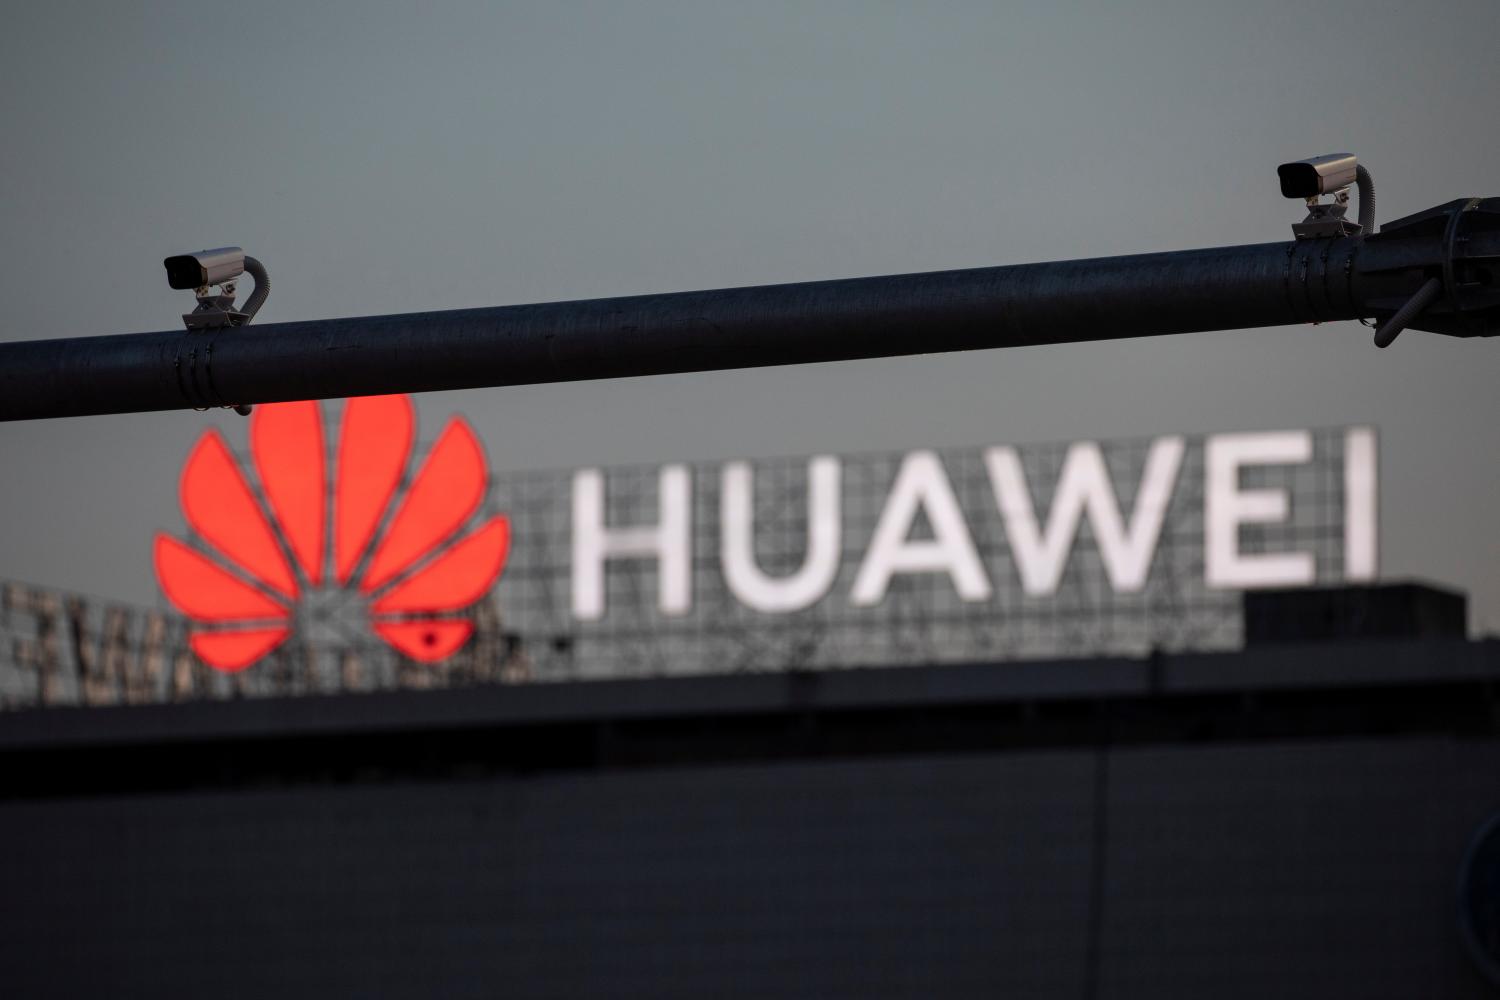 Surveillance cameras are seen in front of a Huawei logo in Belgrade, Serbia, August 11, 2020. Picture taken August 11, 2020. REUTERS/Marko Djurica